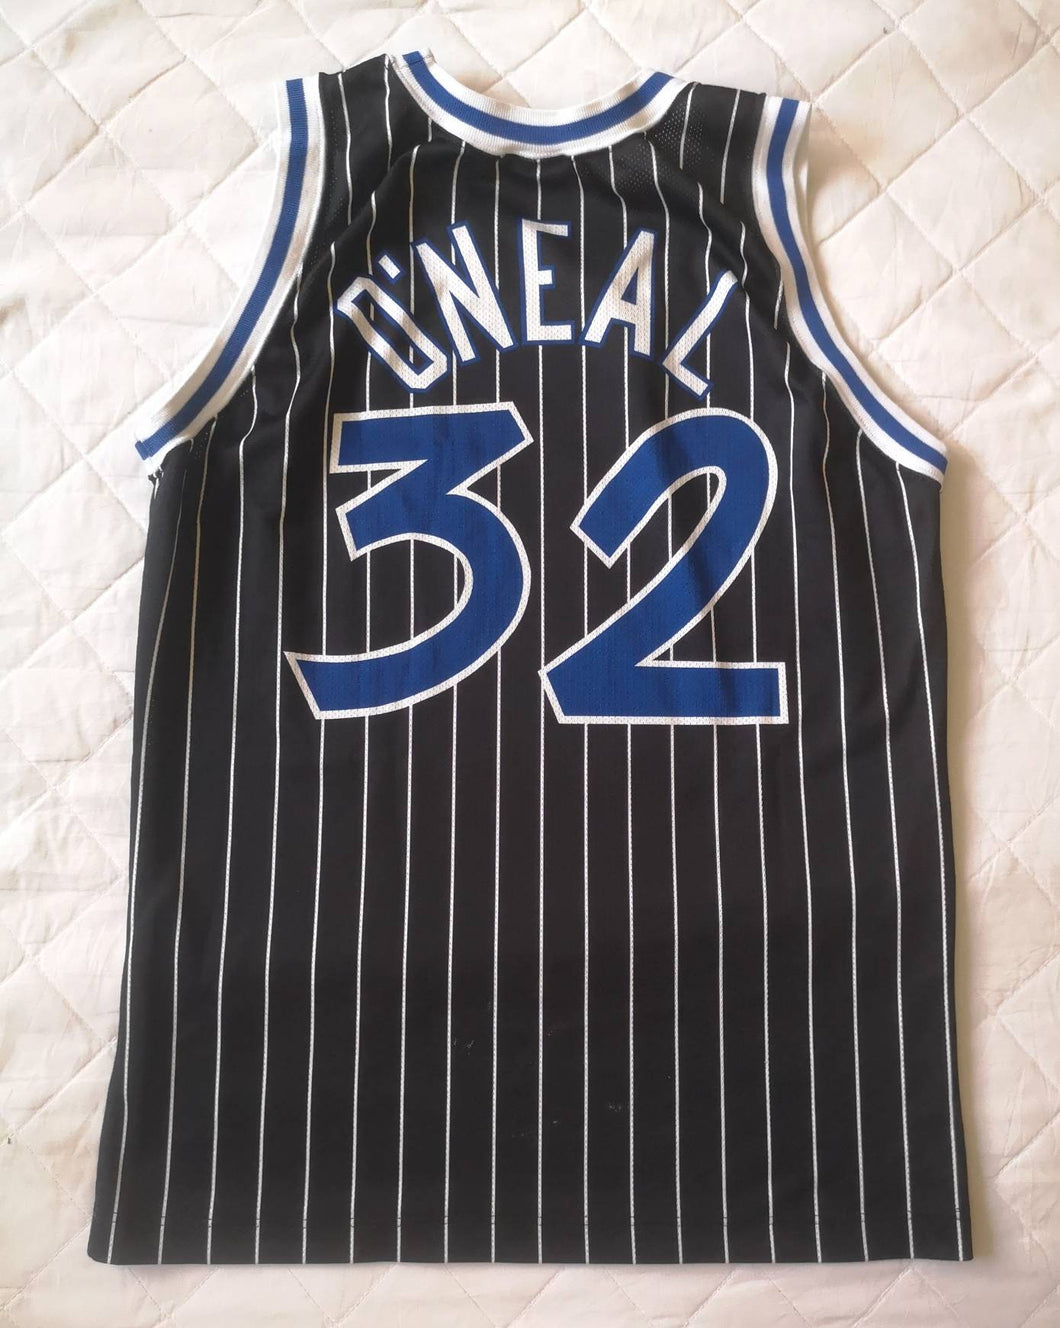 Authentic jersey Shaquille O'Neal Orlando Magic 1990's Champion Vintage